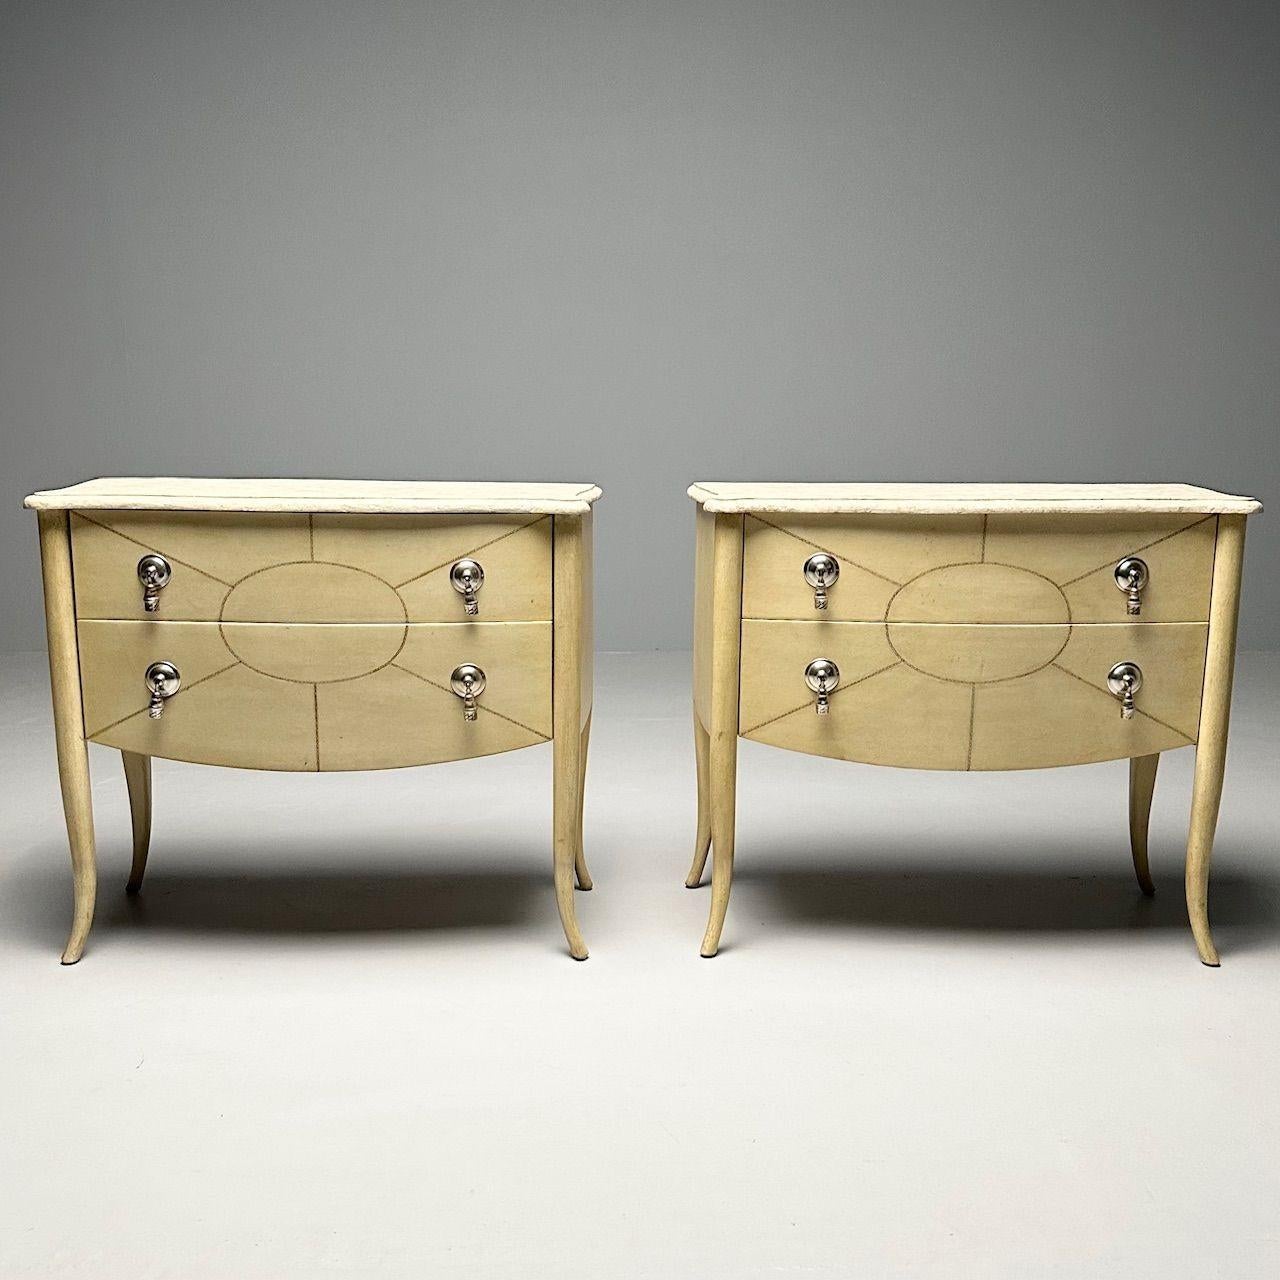 Pair of Art Deco Style Parchment Paper Nightstands / Commodes, Faux Stone Top

Pair of mid-century modern cabinets in the manner of French designer, Andre Groult having a parchment paper finish, faux stone tops, and Nickle plated drawer pulls. Can